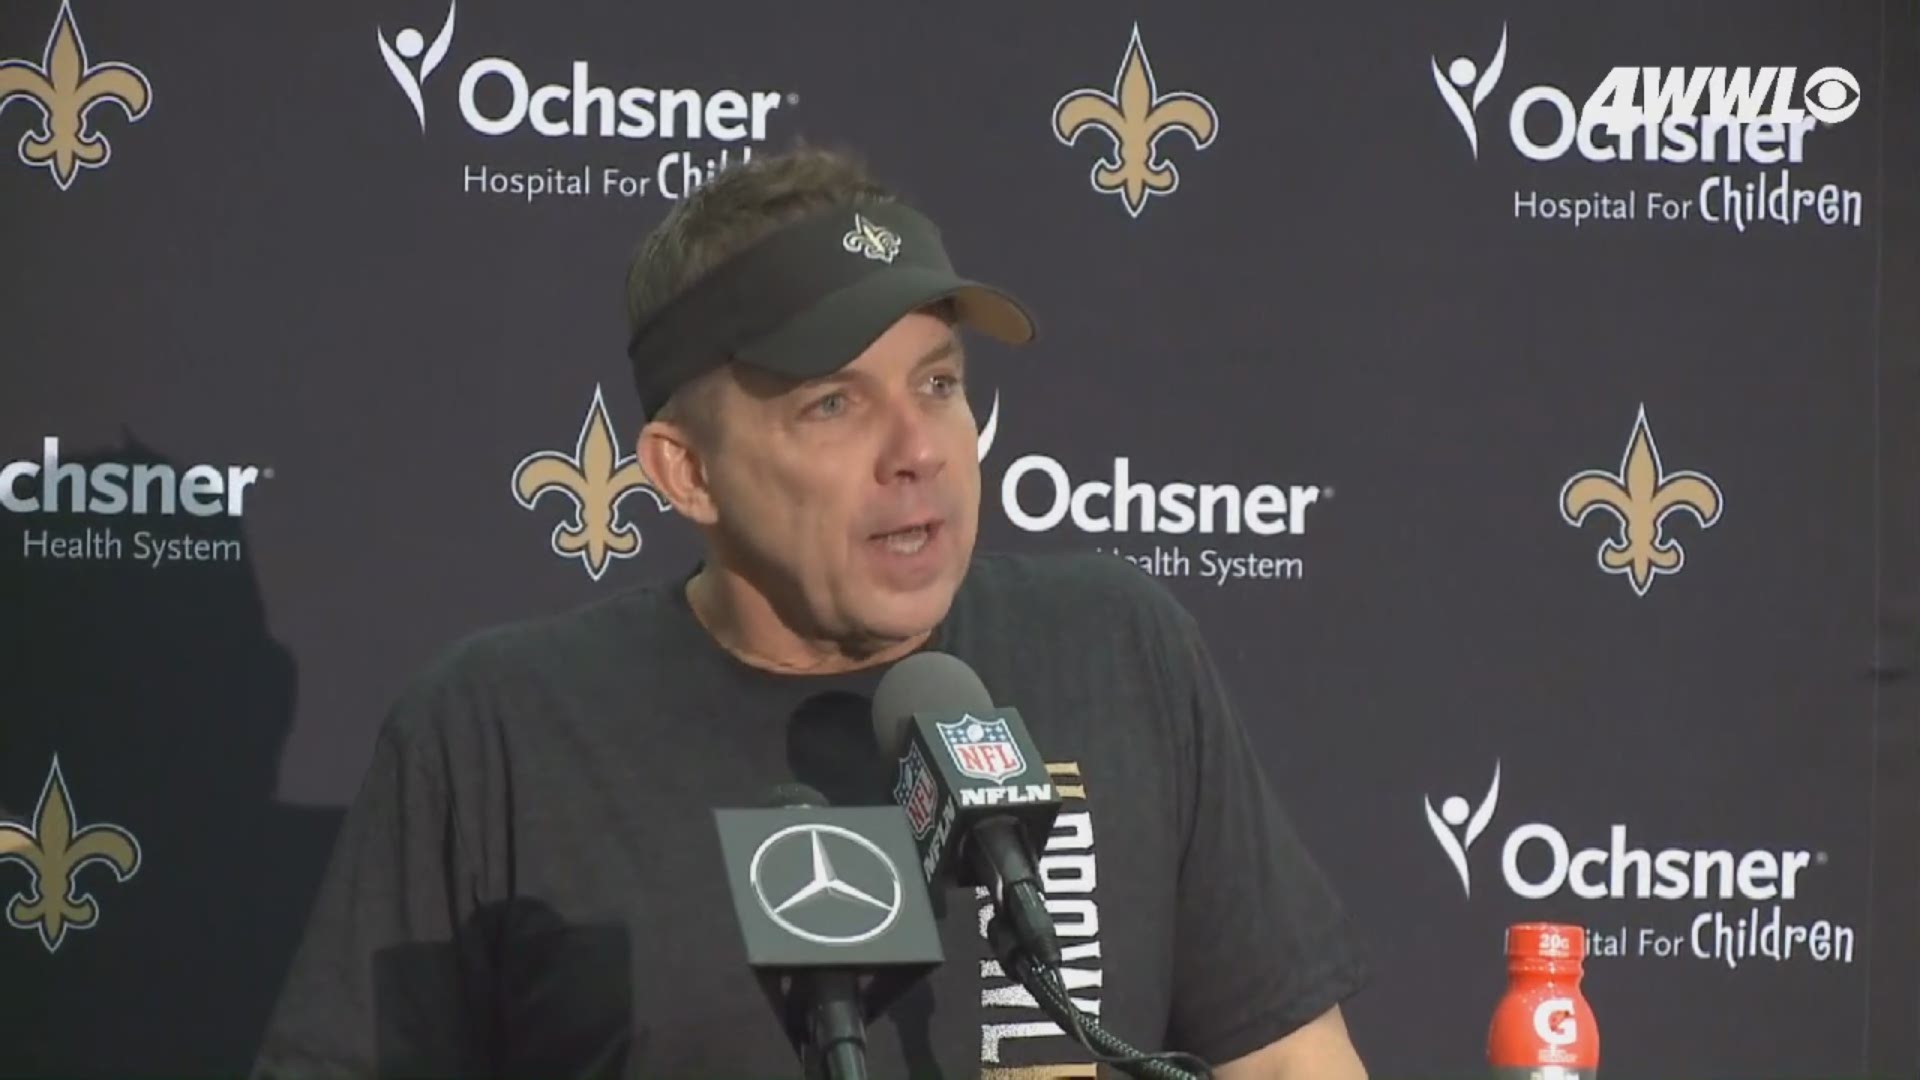 "Getting the defensive stop to force a field goal was big," Sean Payton said.